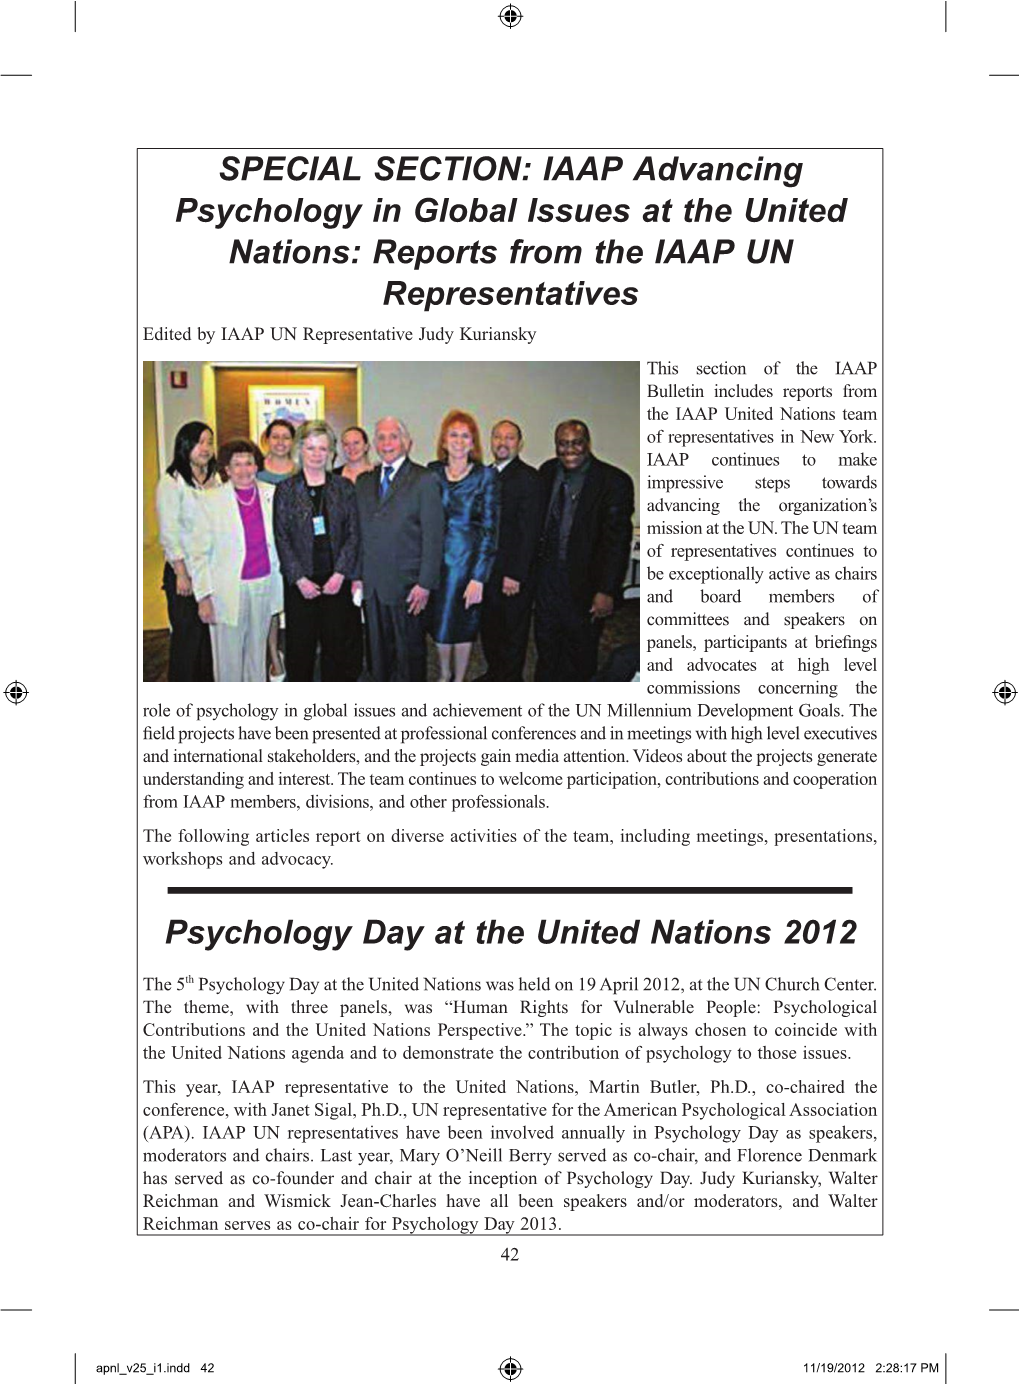 IAAP Advancing Psychology in Global Issues at the United Nations